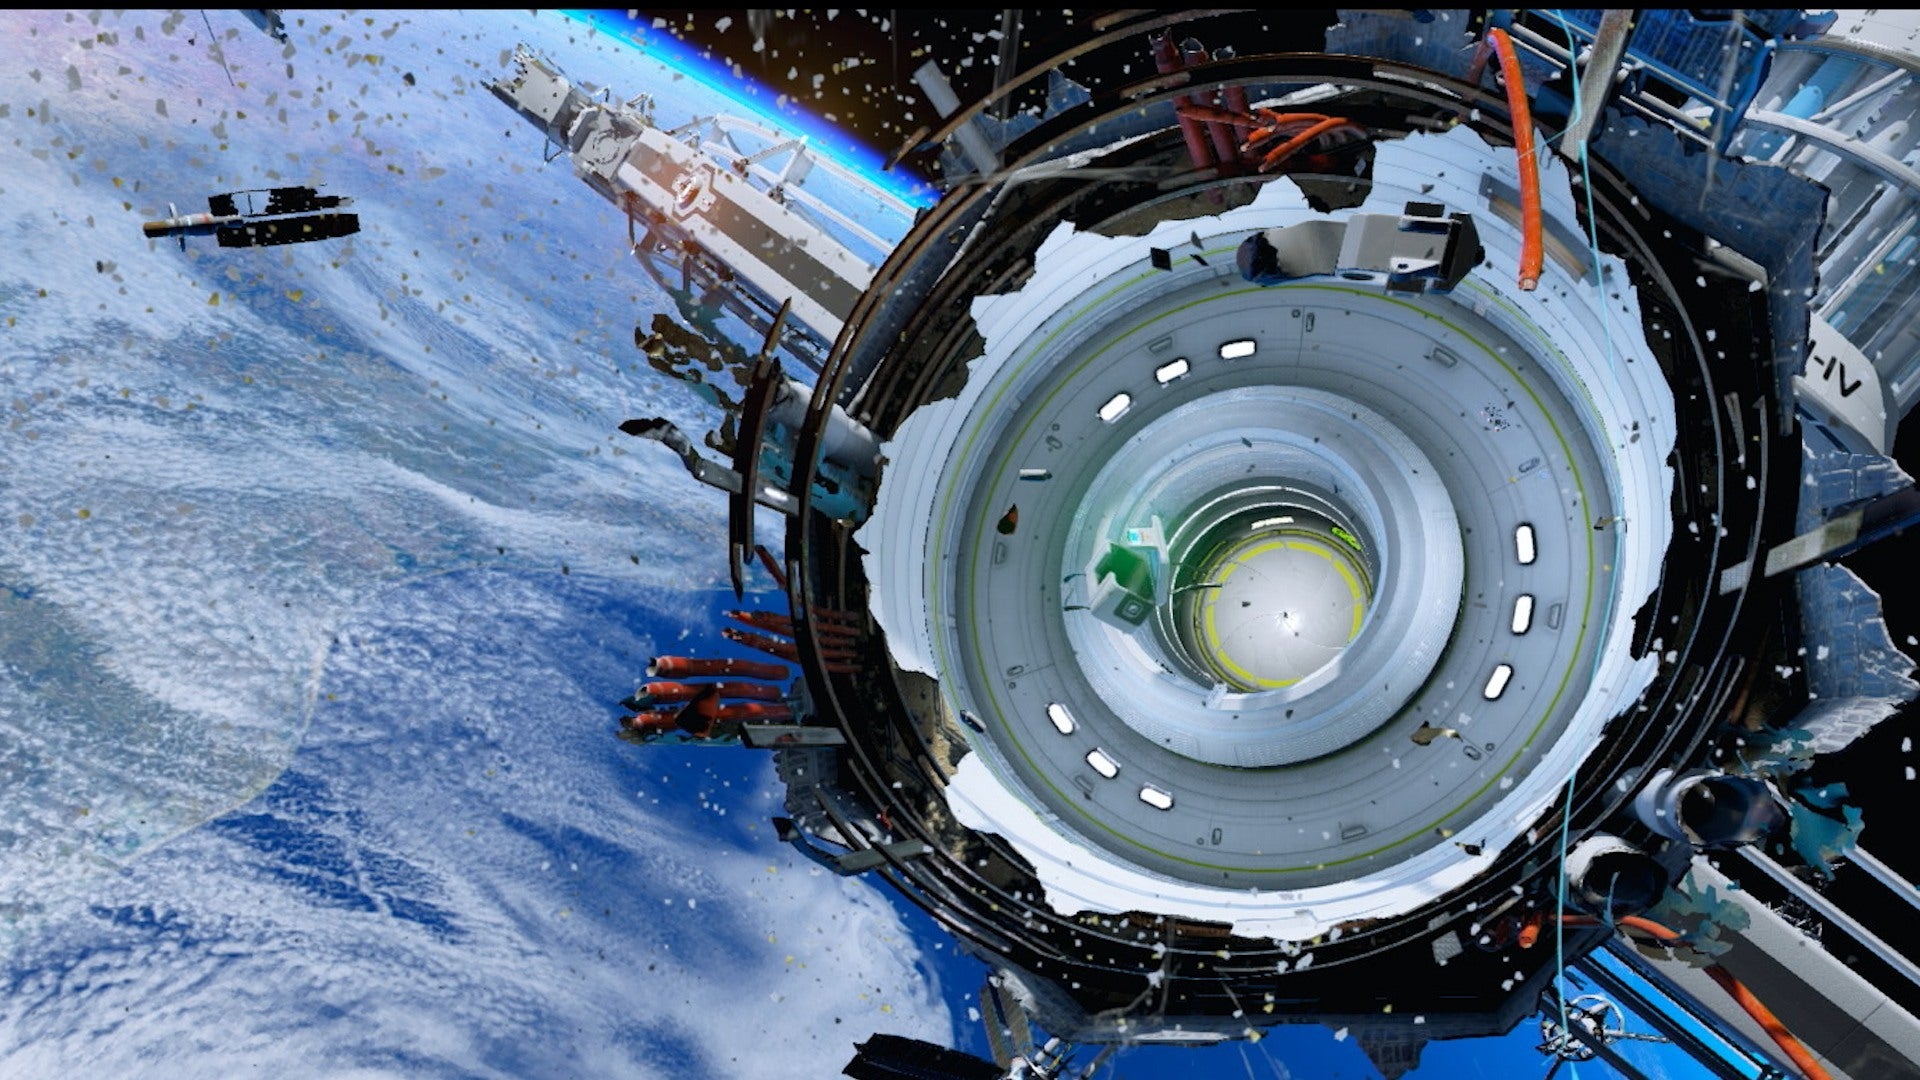 ADR1FT Wallpapers